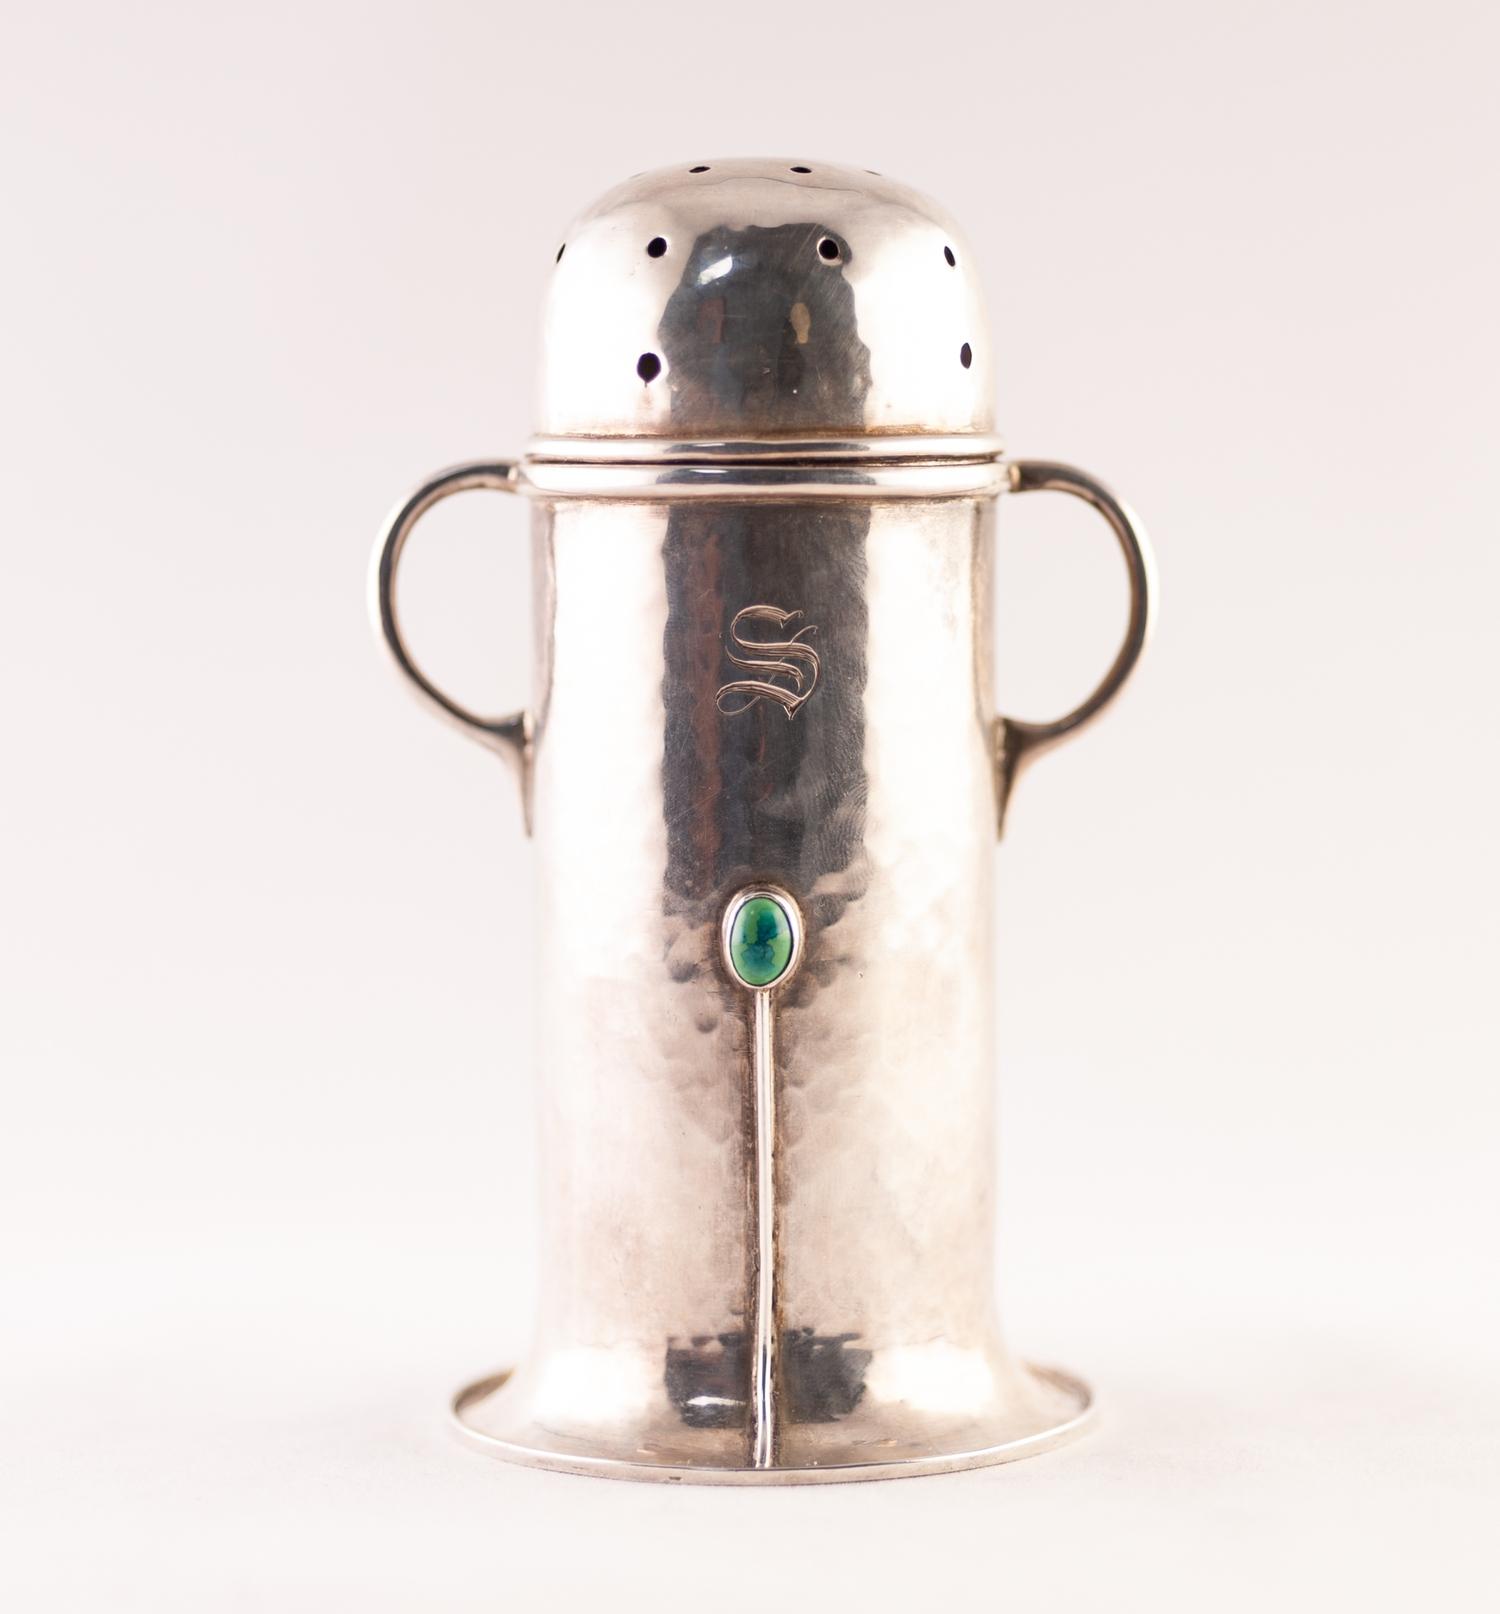 EDWARDIAN ARTS & CRAFTS PLANISHED SILVER TOW HANDLED SUGAR CASTOR OF LIGHTHOUSE PATTERN, with